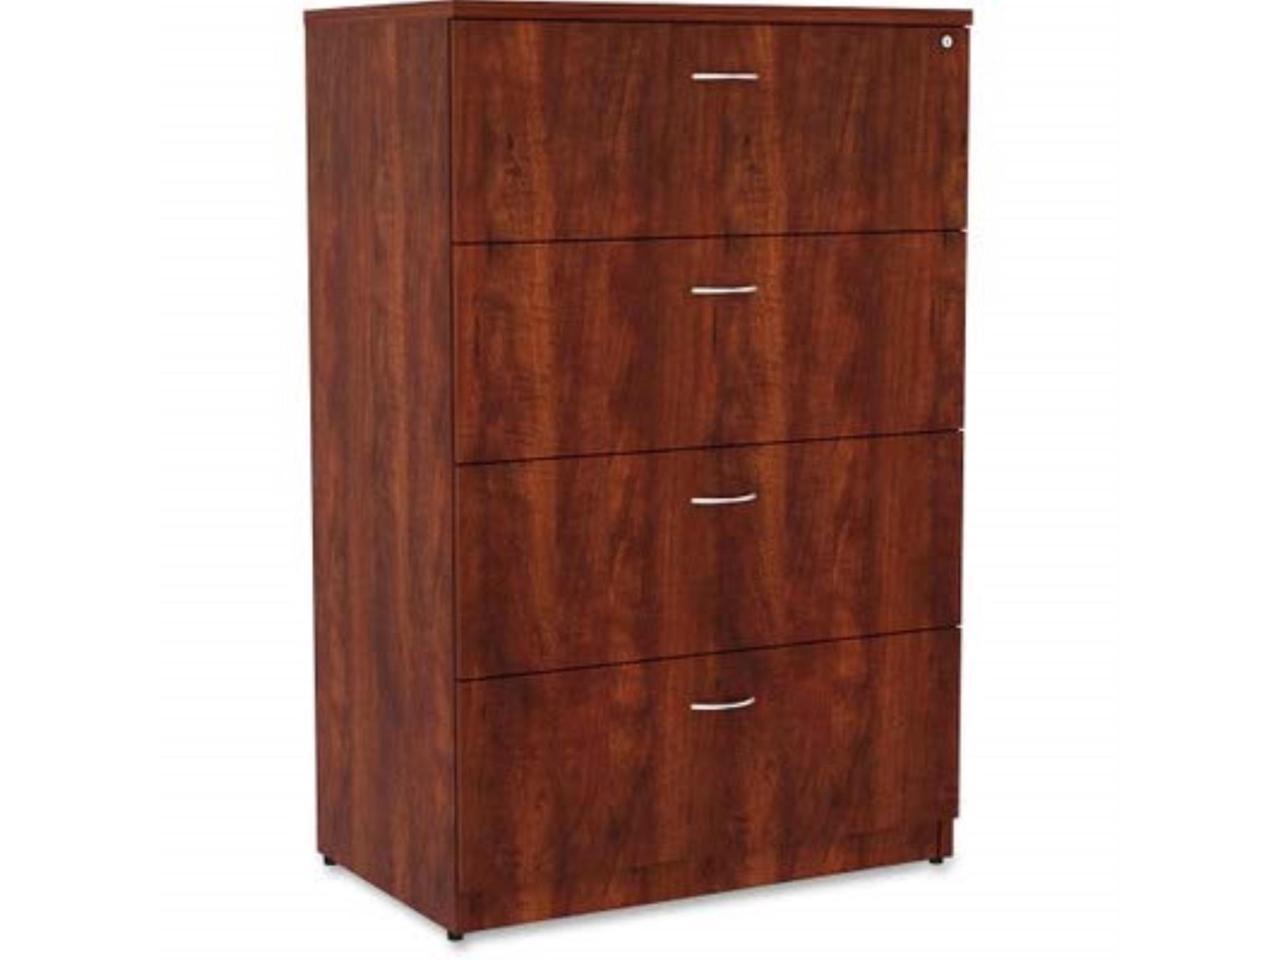 Lorell 4-Drawer Lateral File 35-1/2"x22"x54-3/4" Cherry 34387 - image 3 of 5